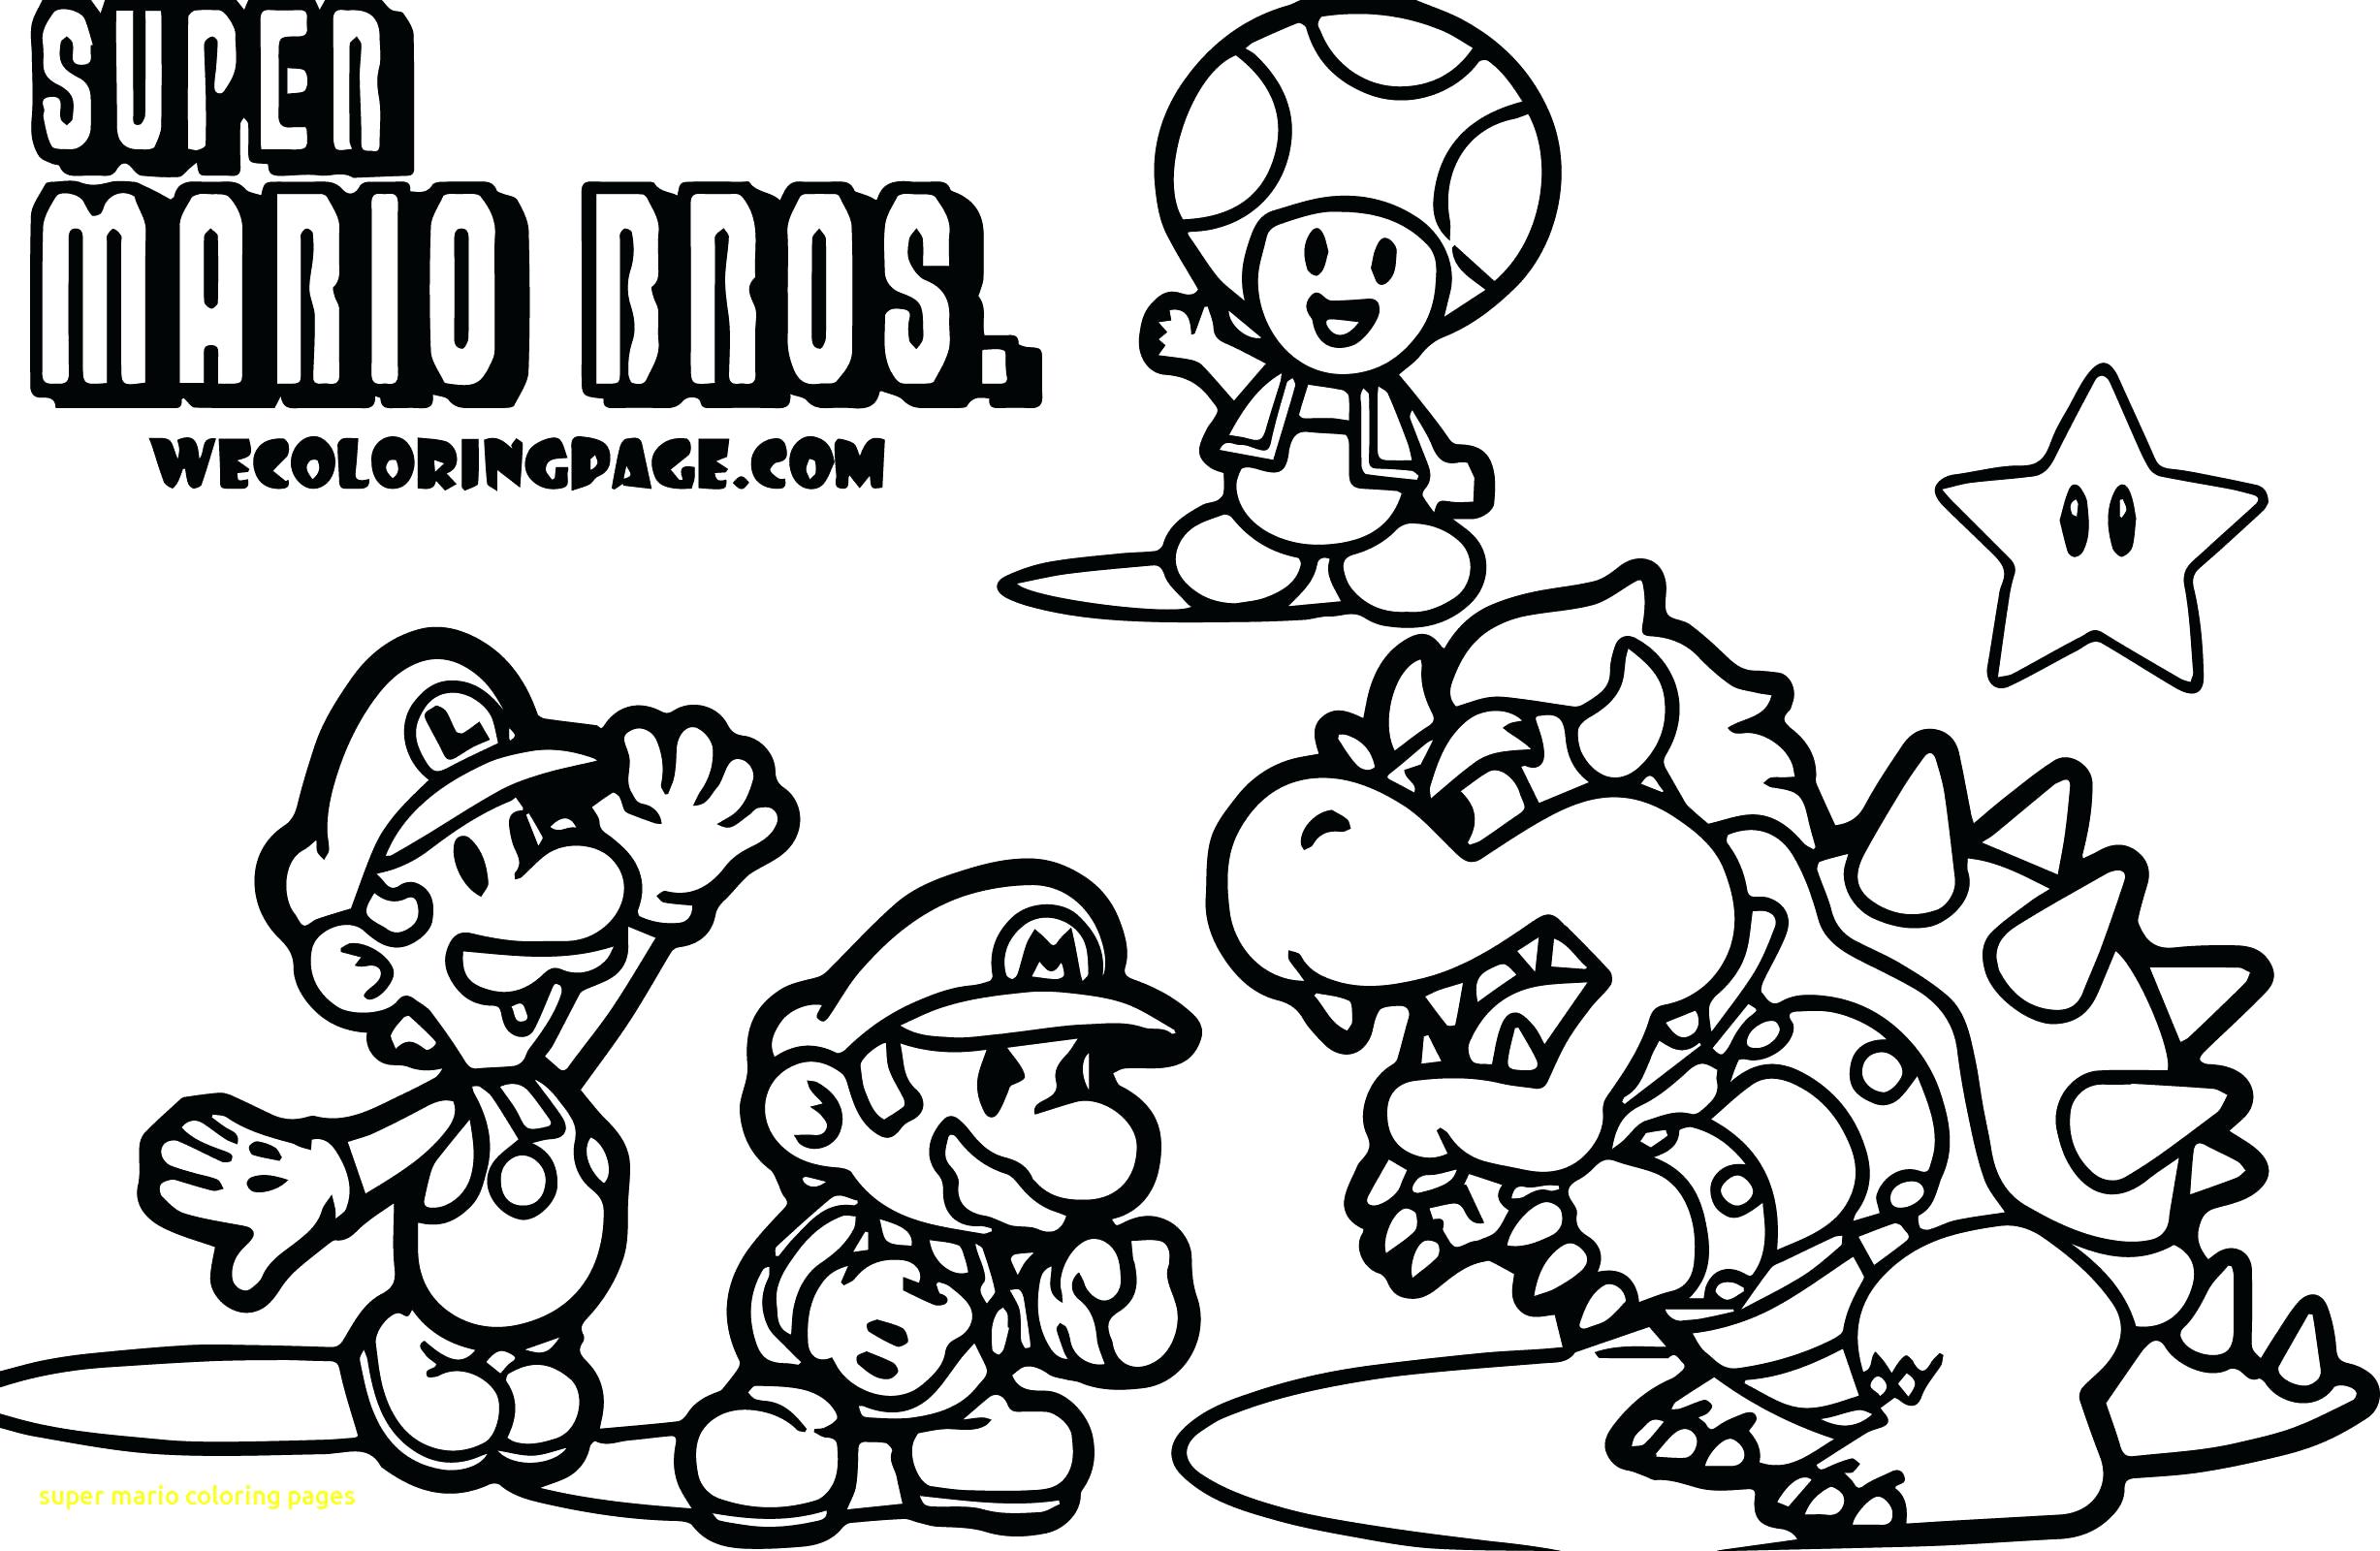 super mario 3d world coloring pages at getcolorings